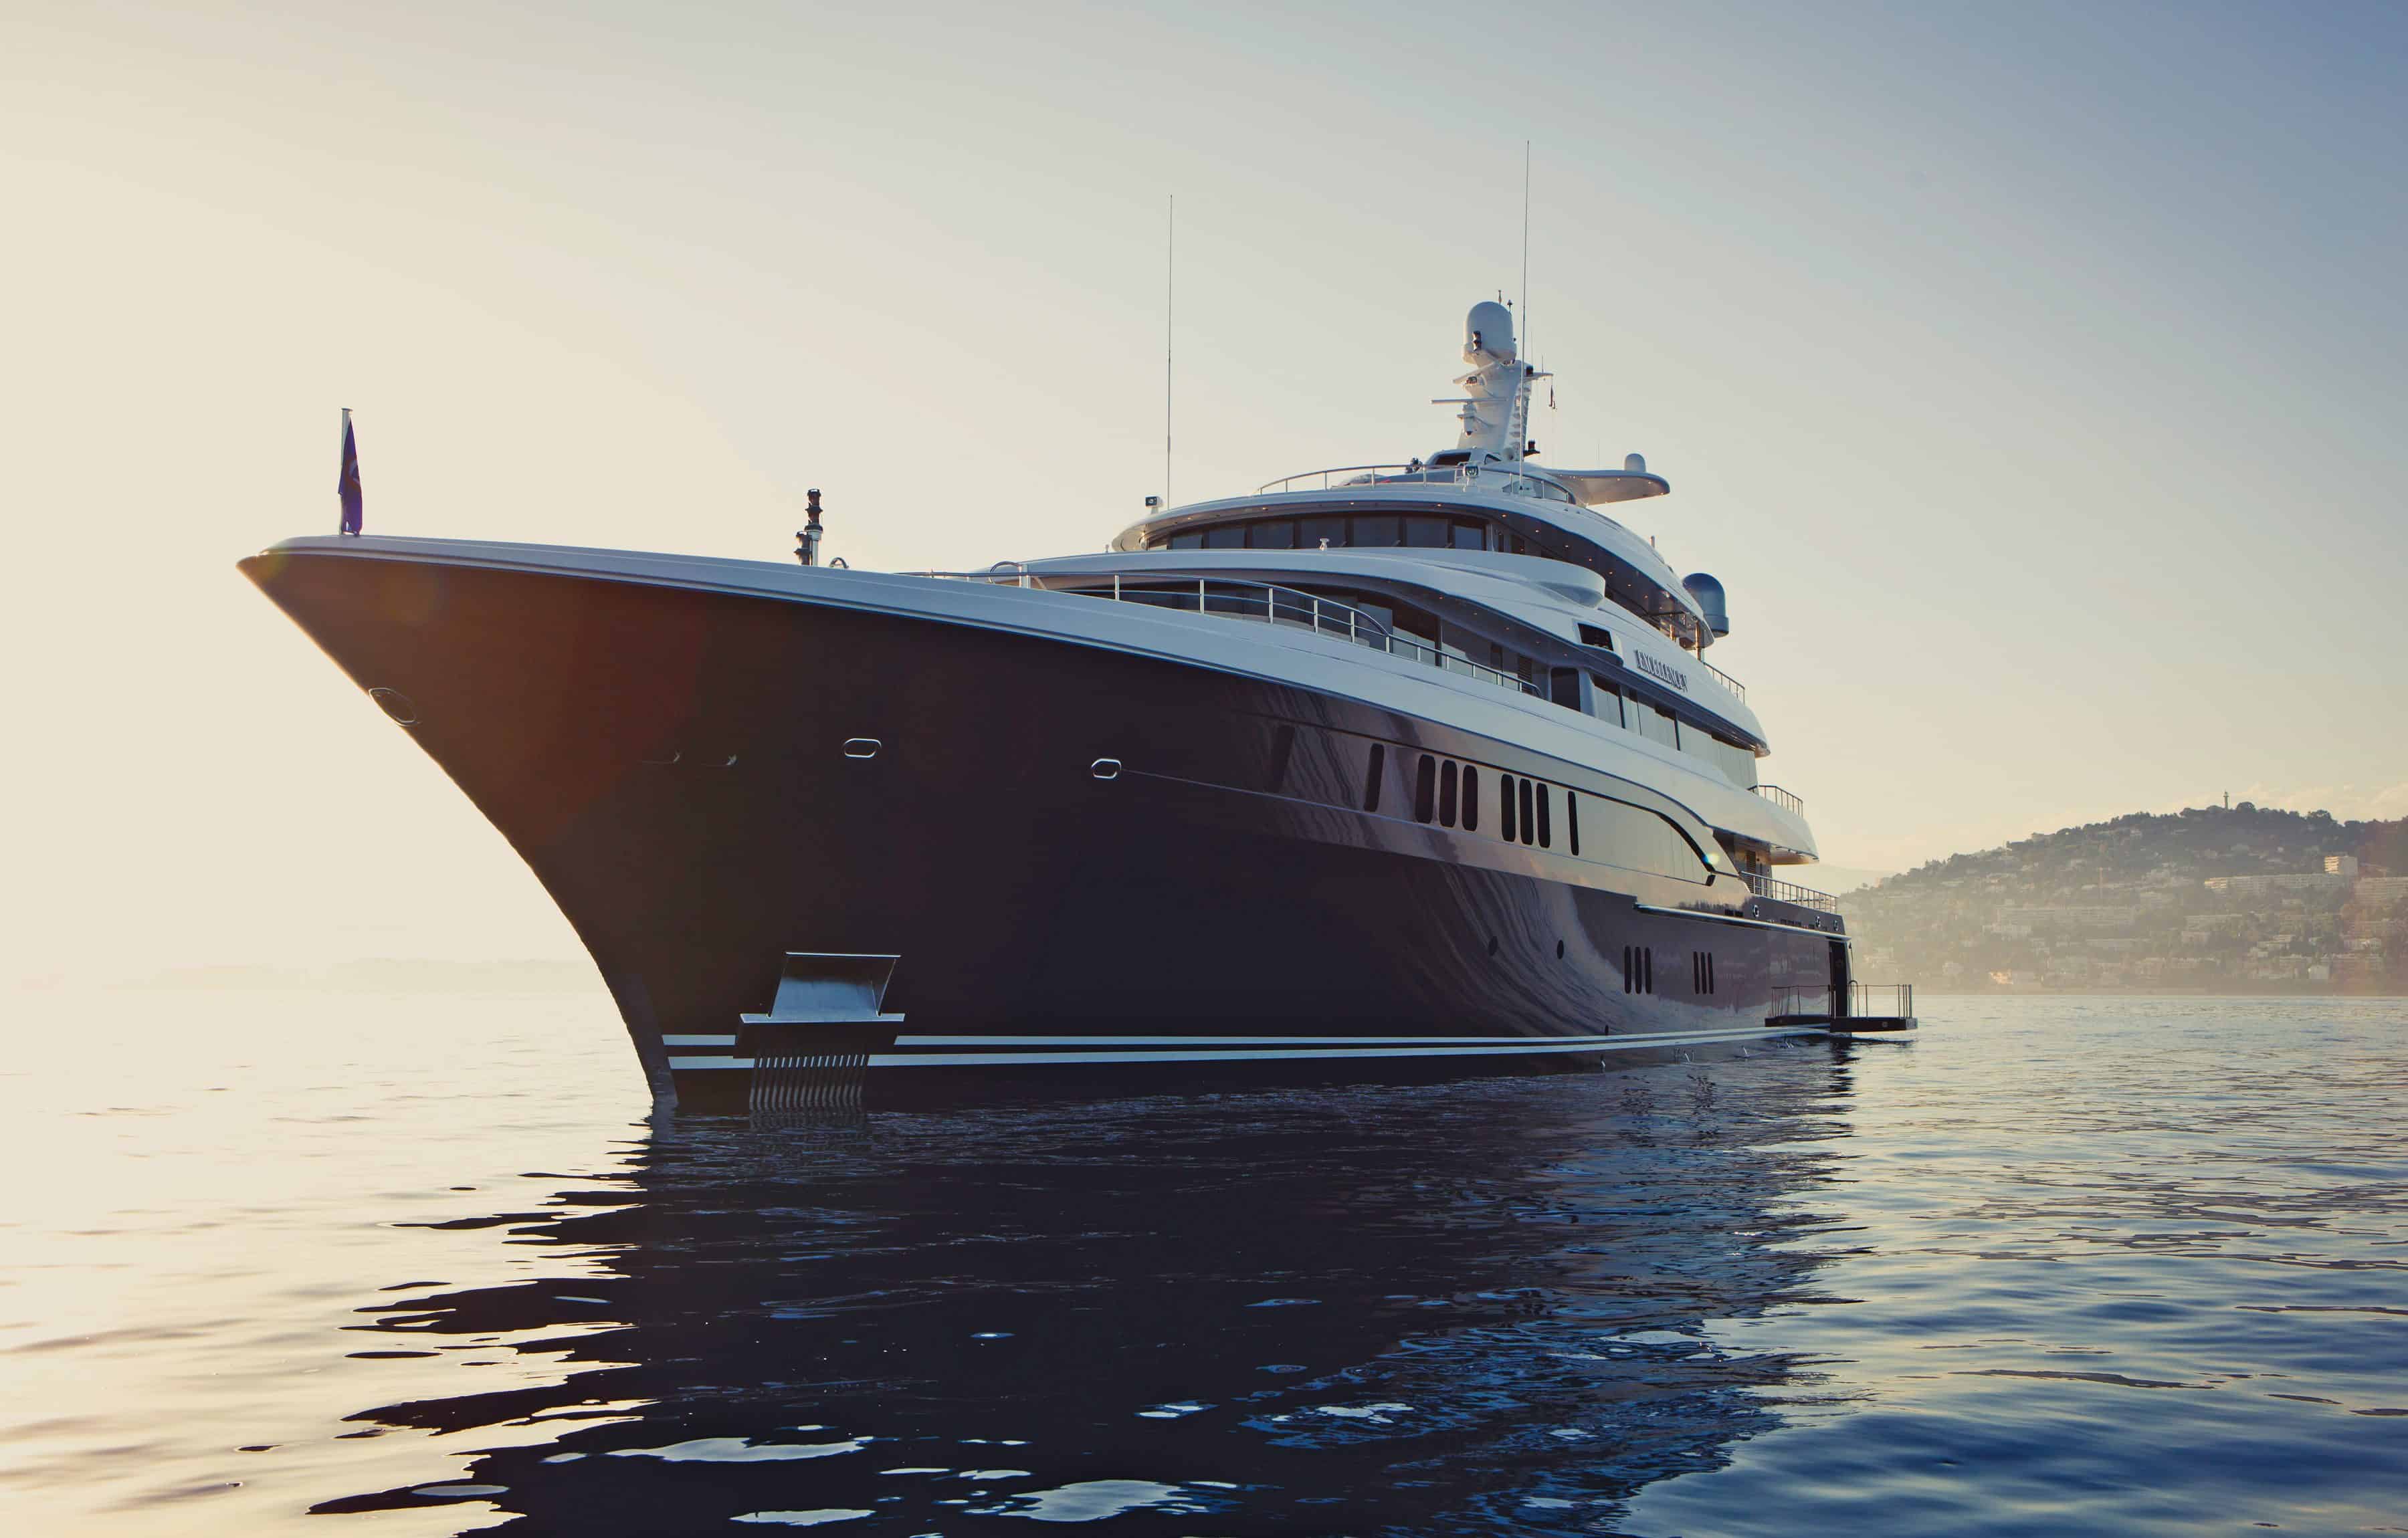 who owns excellence v yacht